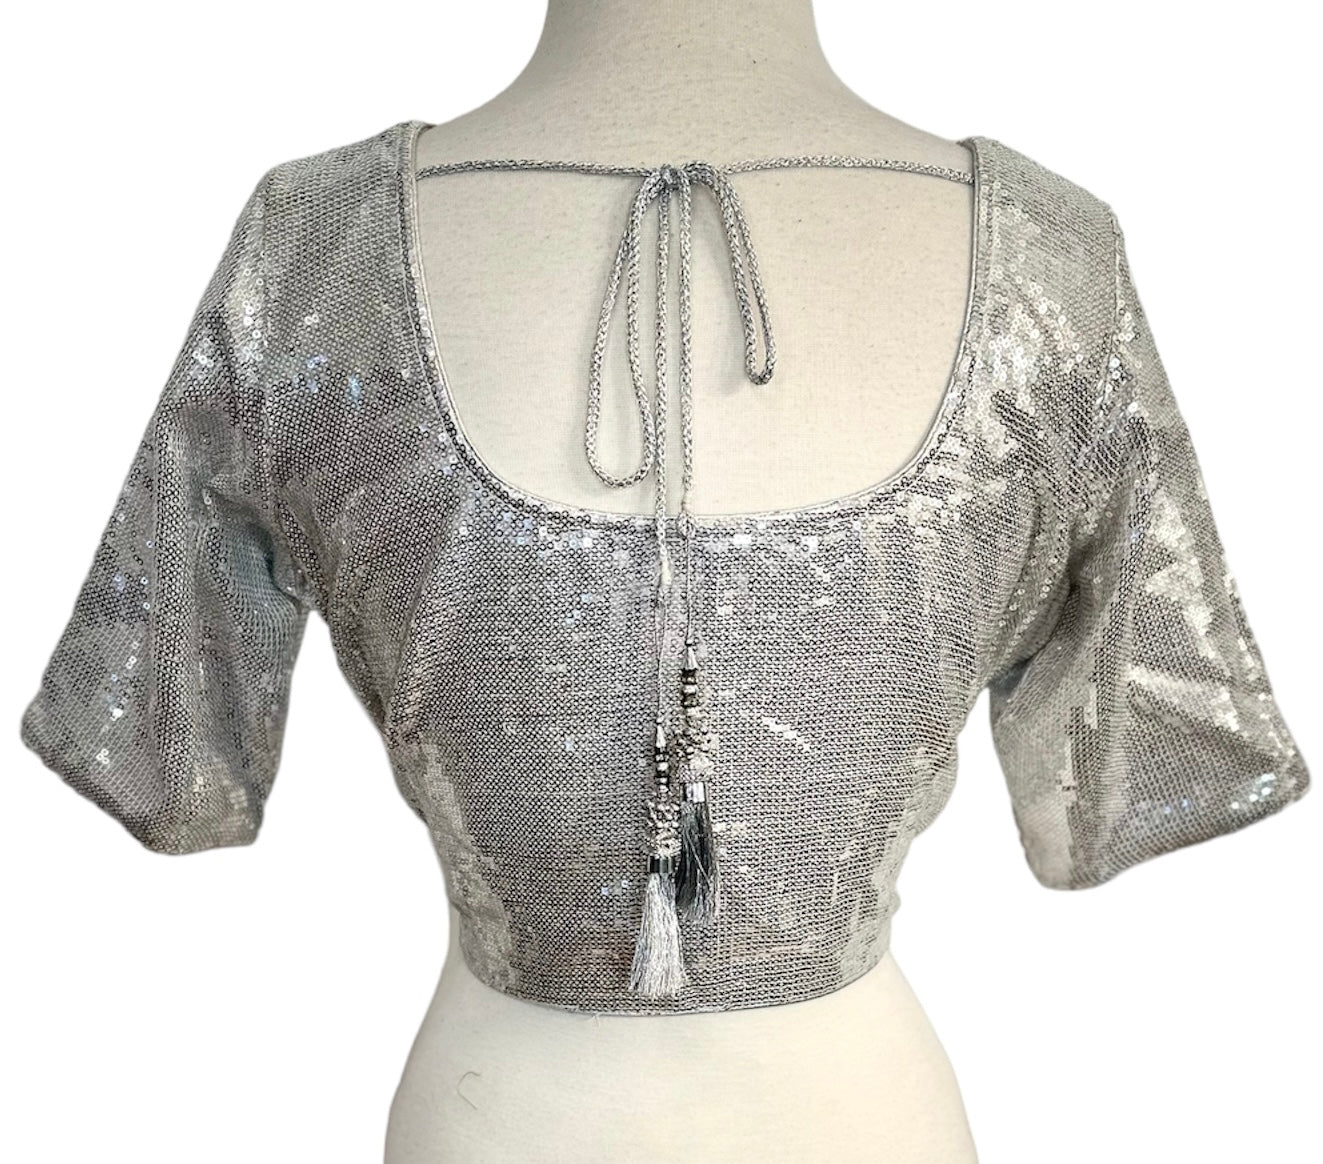 Sequined Silver Blouse